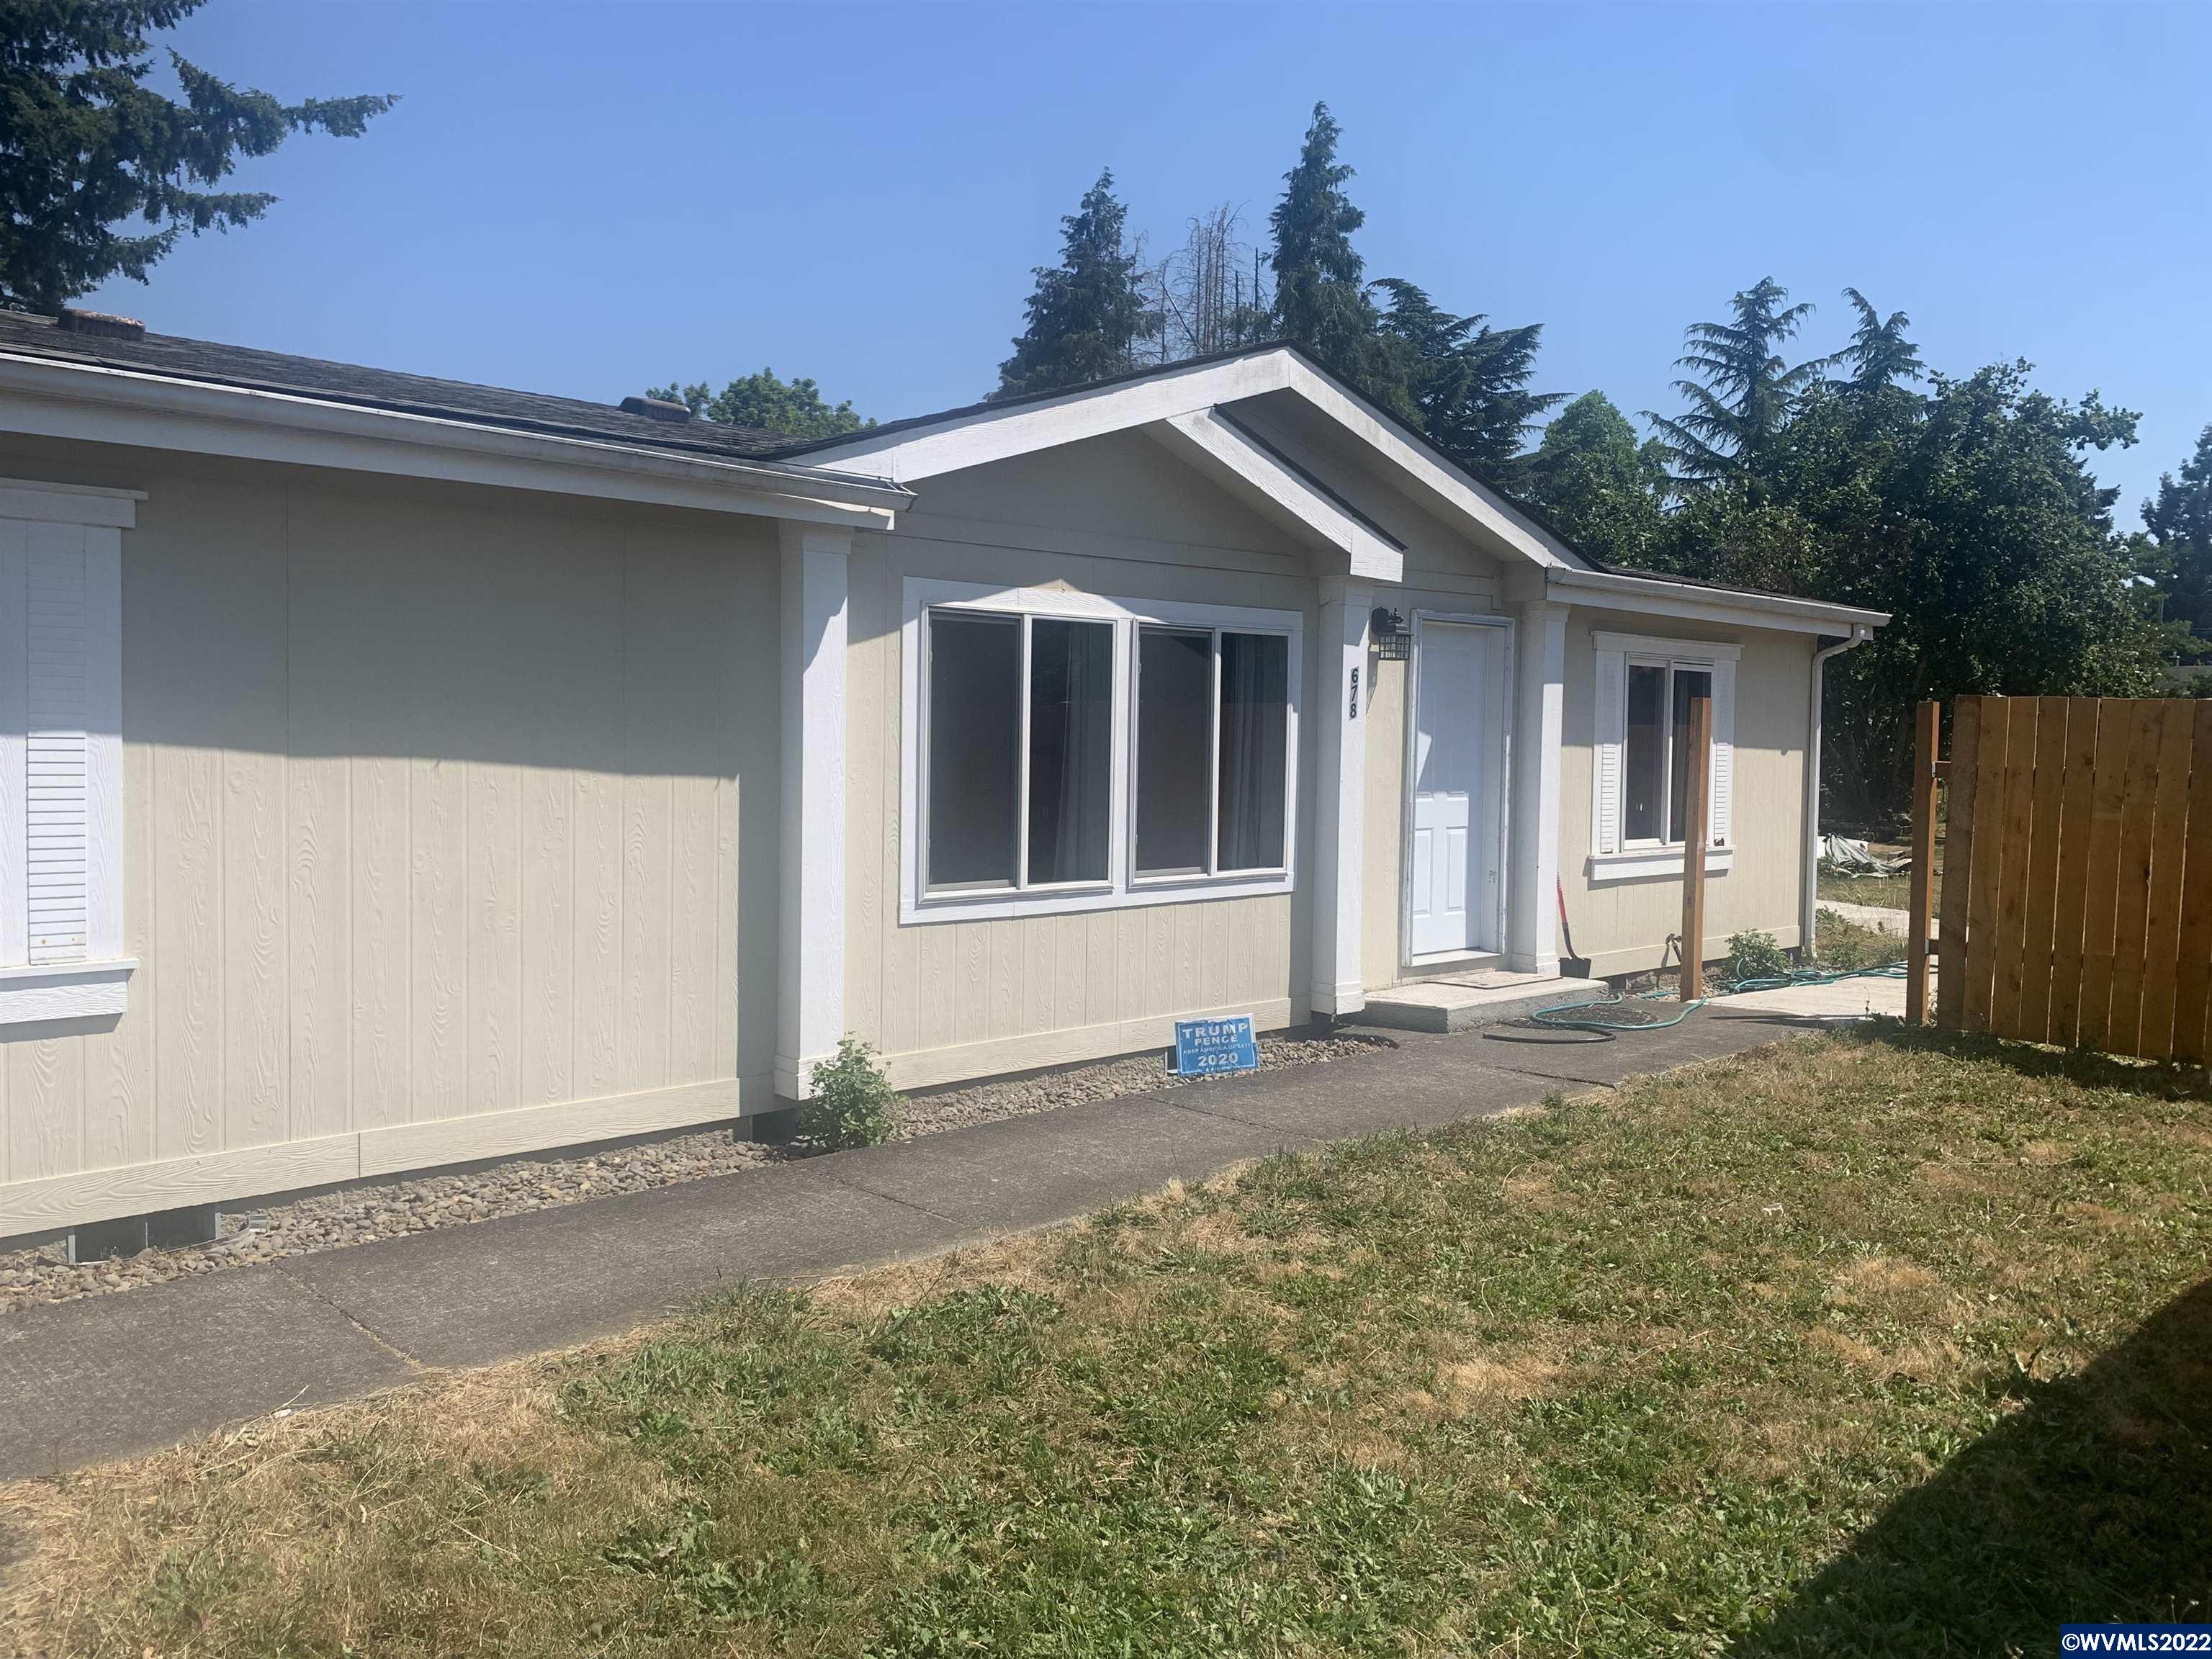 OPEN HOUSE SATURDAY AUGUST 13, 9AM TO 12PM  Come see!!!!    1296 Square  foot Manufactured home in Lebanon tucked away off Grant street!!!!   3 bedrooms, 2 bath with a laundry room.  Great floor plan!!!   .26 acre lot with a patio area and lots of space!!!   Has a detached two car garage, and a new fence.  A great patio area in the backyard and lots of space!!!!   This home is ready for you to move in and enjoy!!!